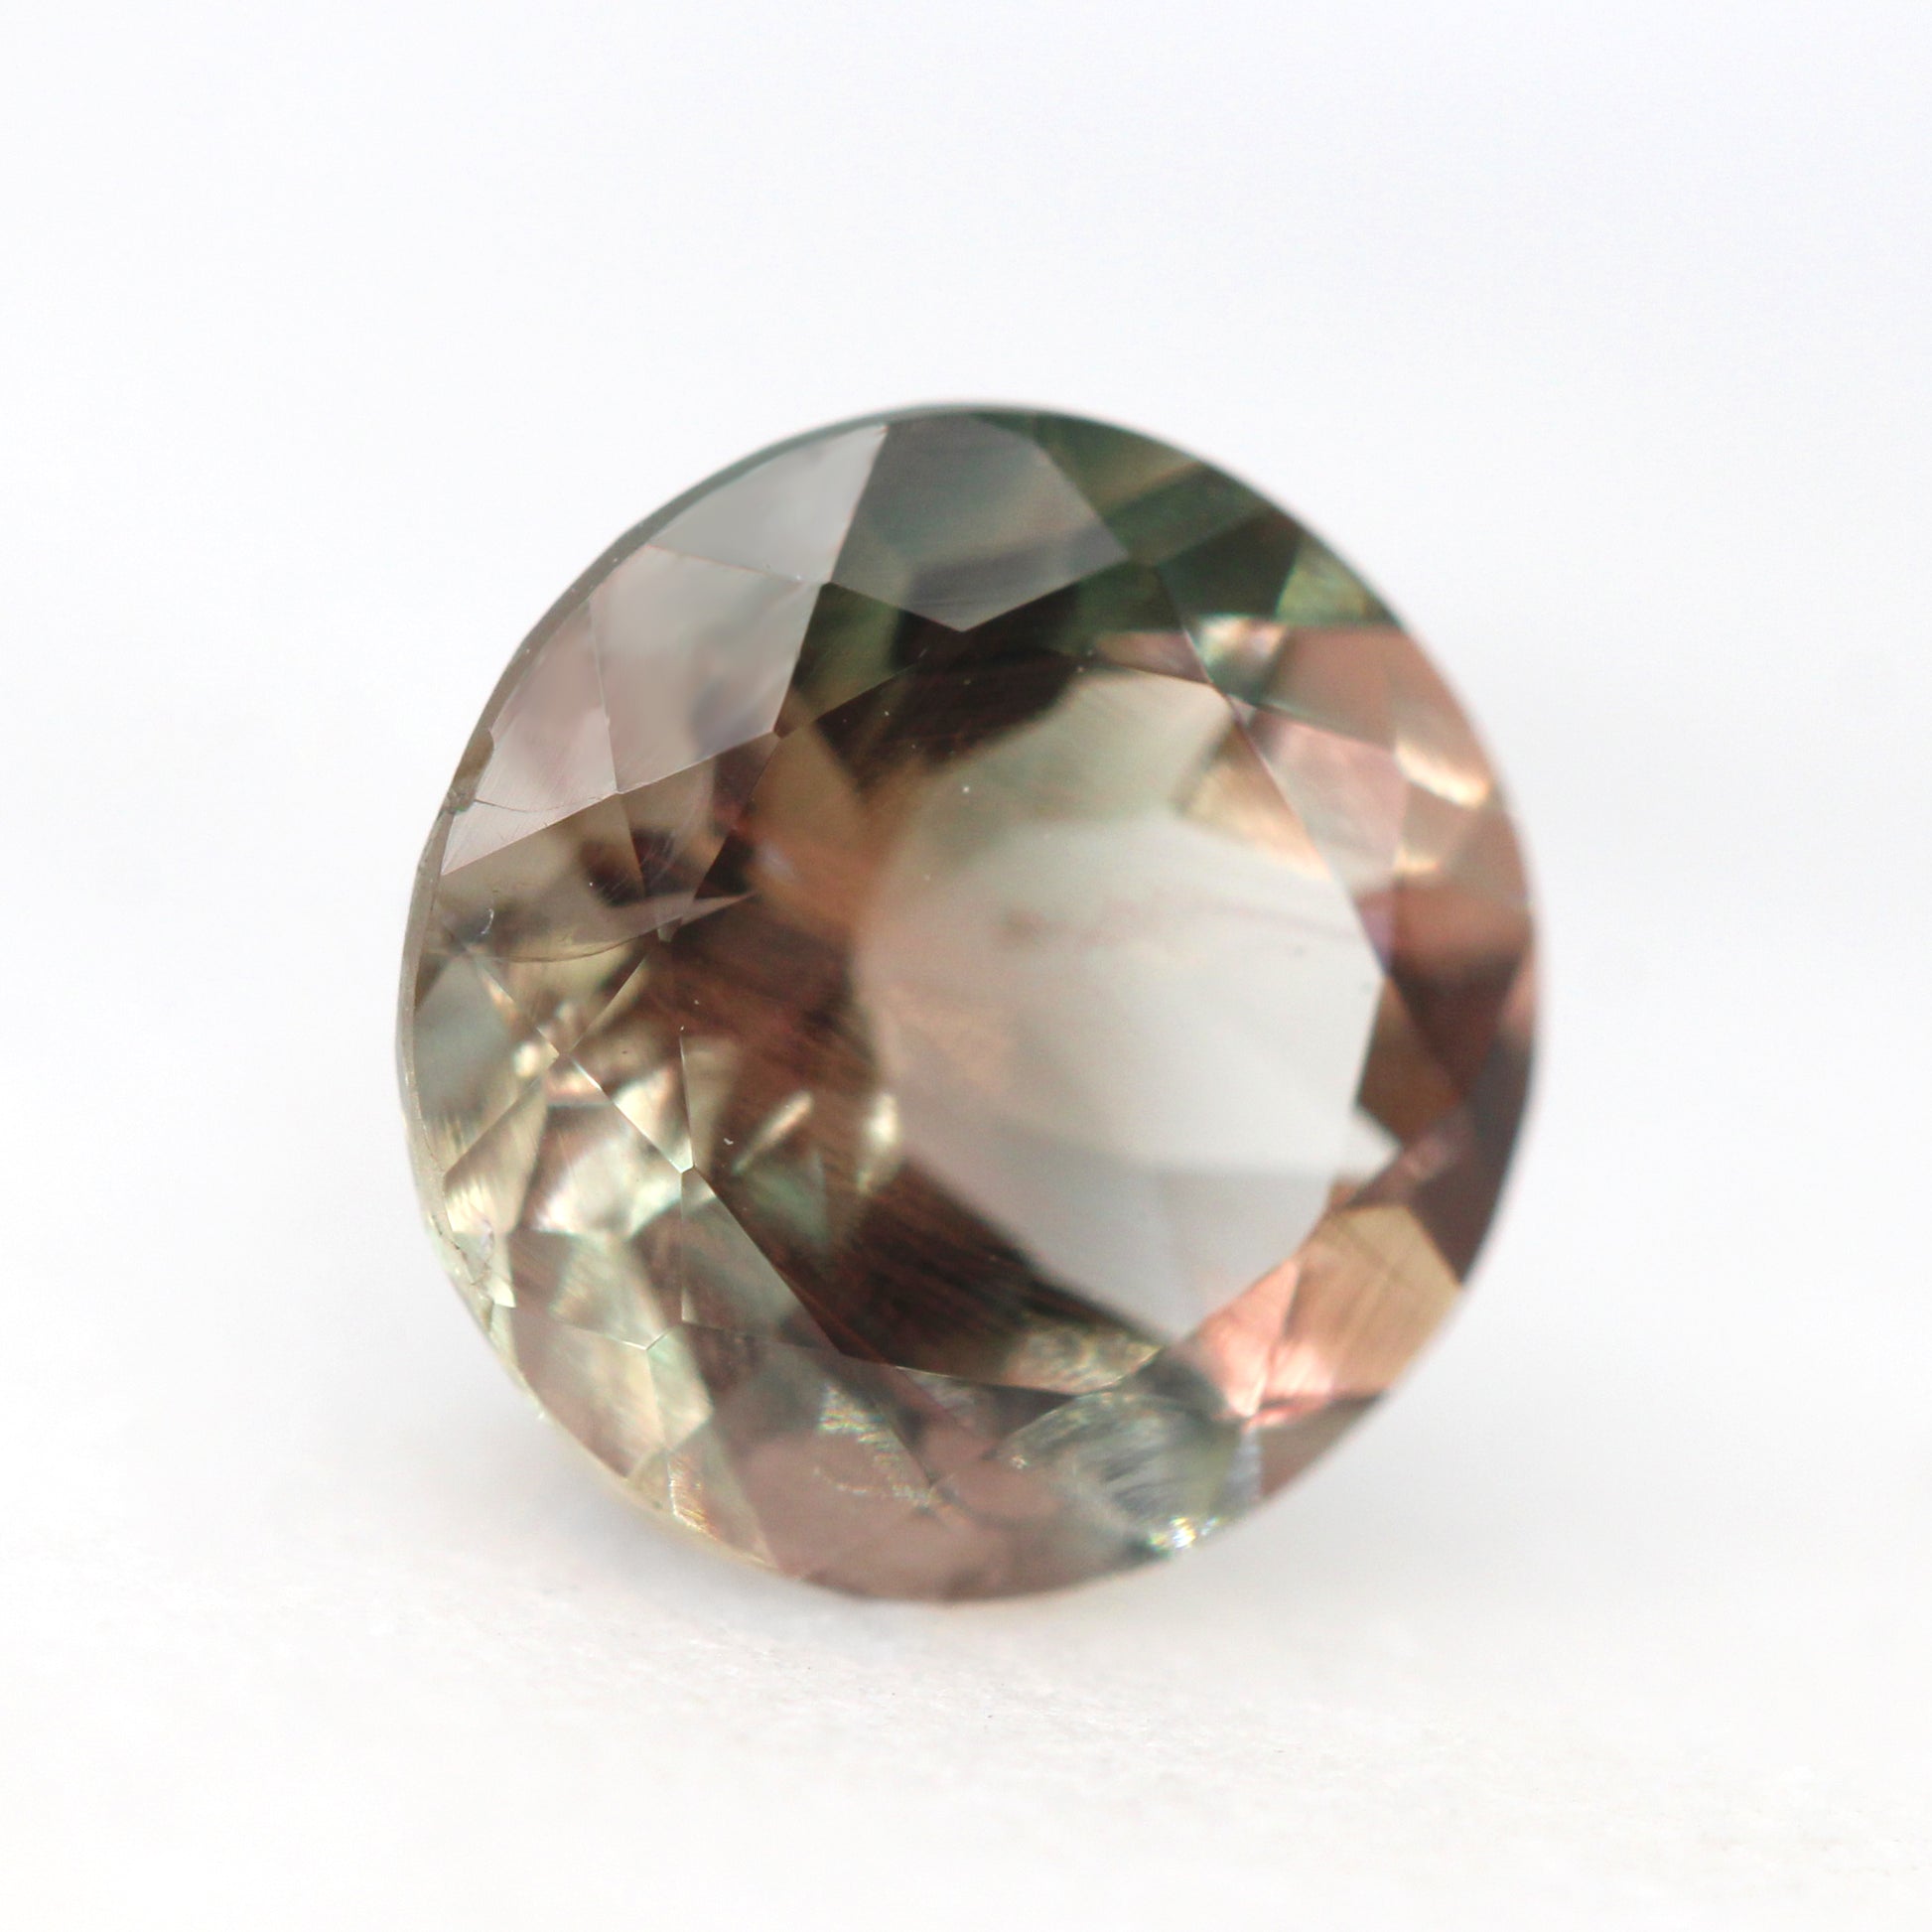 1.55 Carat Bicolor Orange and Green Round Sunstone for Custom Work - Inventory Code RNDSUN155 - Midwinter Co. Alternative Bridal Rings and Modern Fine Jewelry